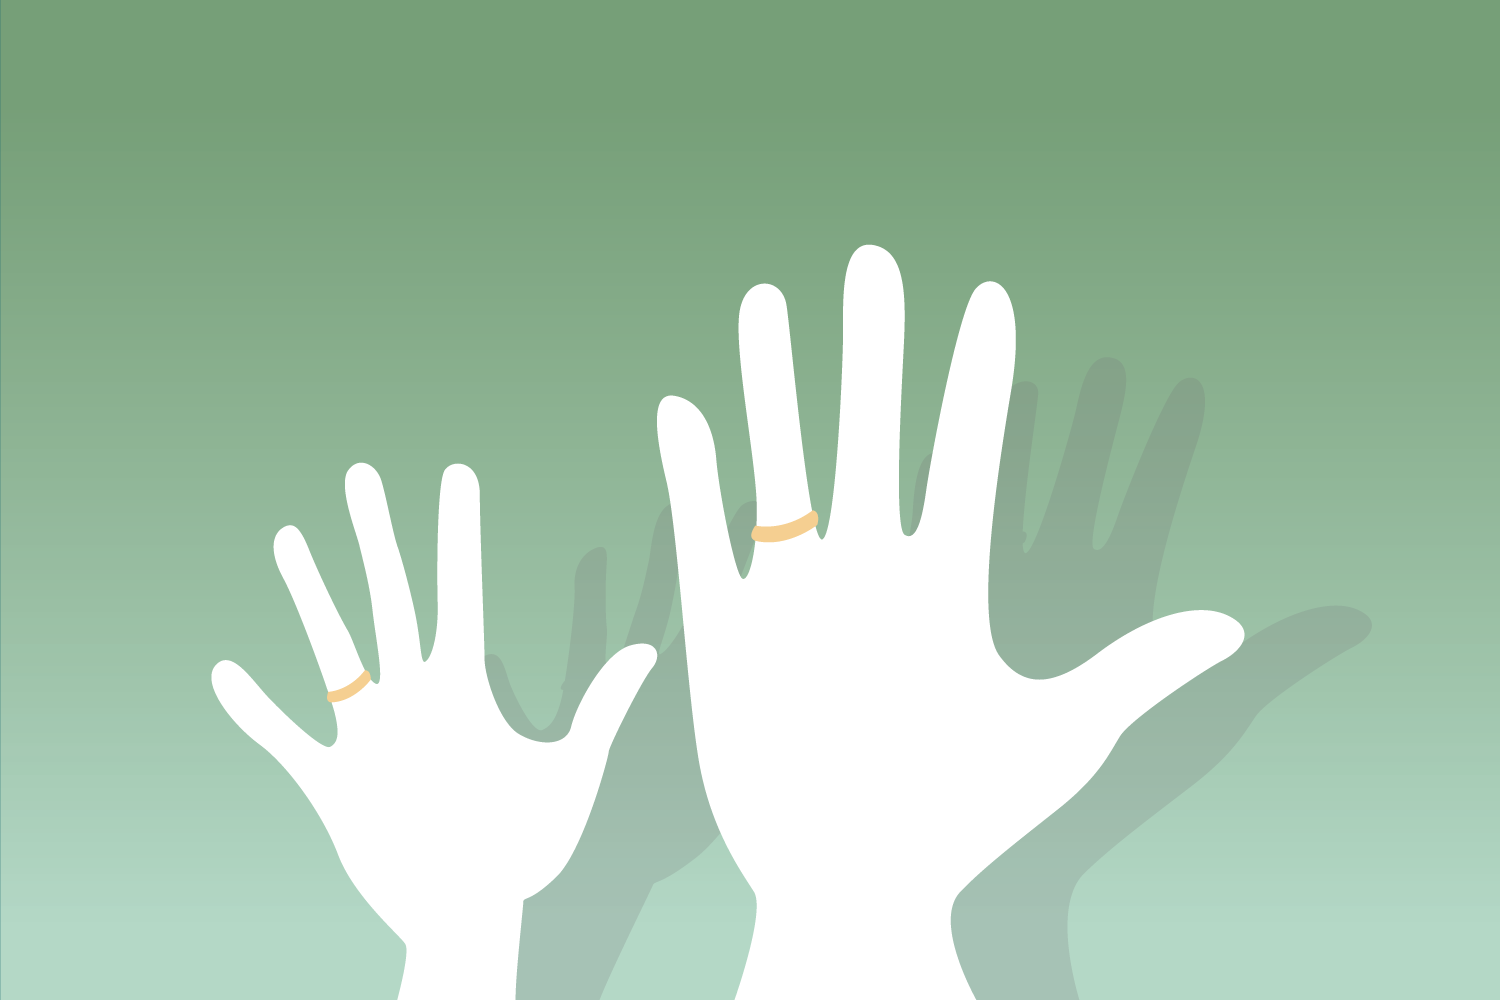 child marriage illustration of two hands